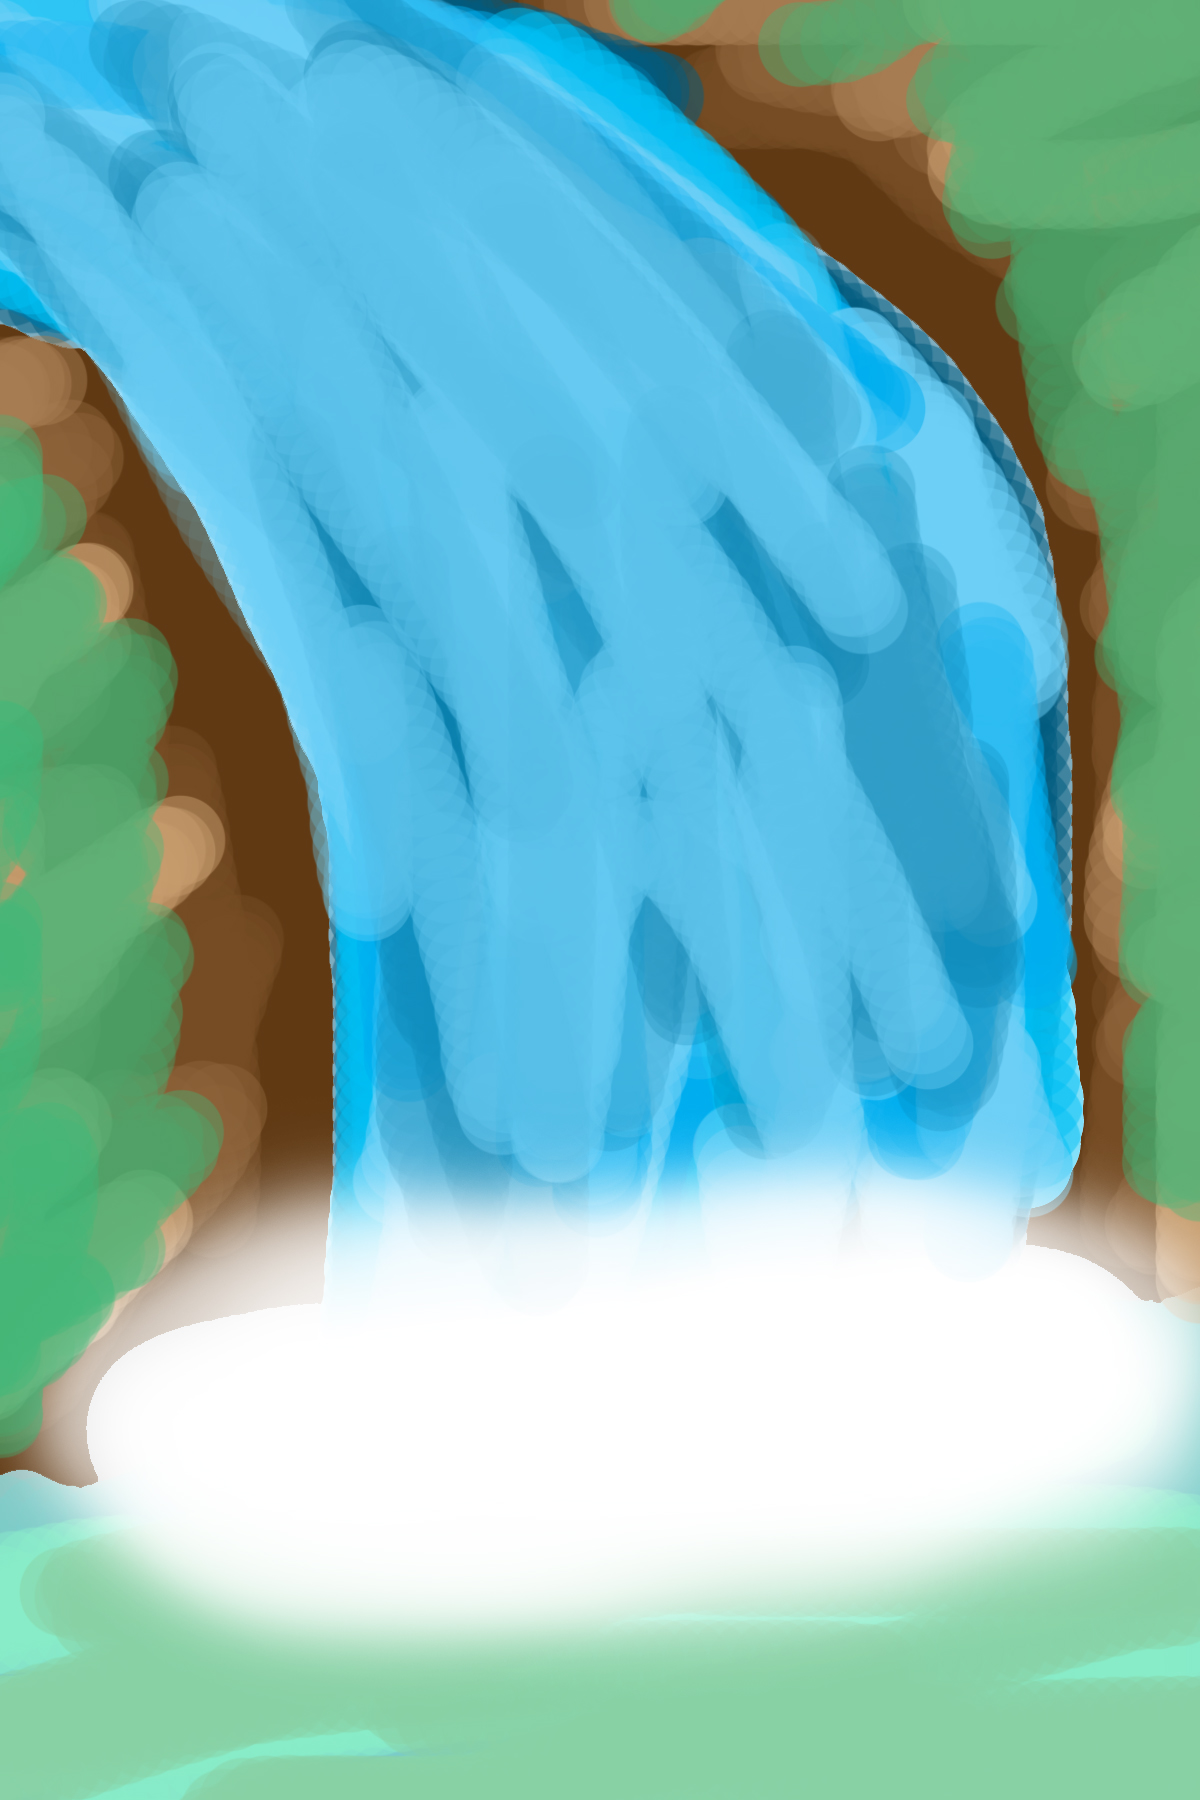 Waterfall by starbolt77